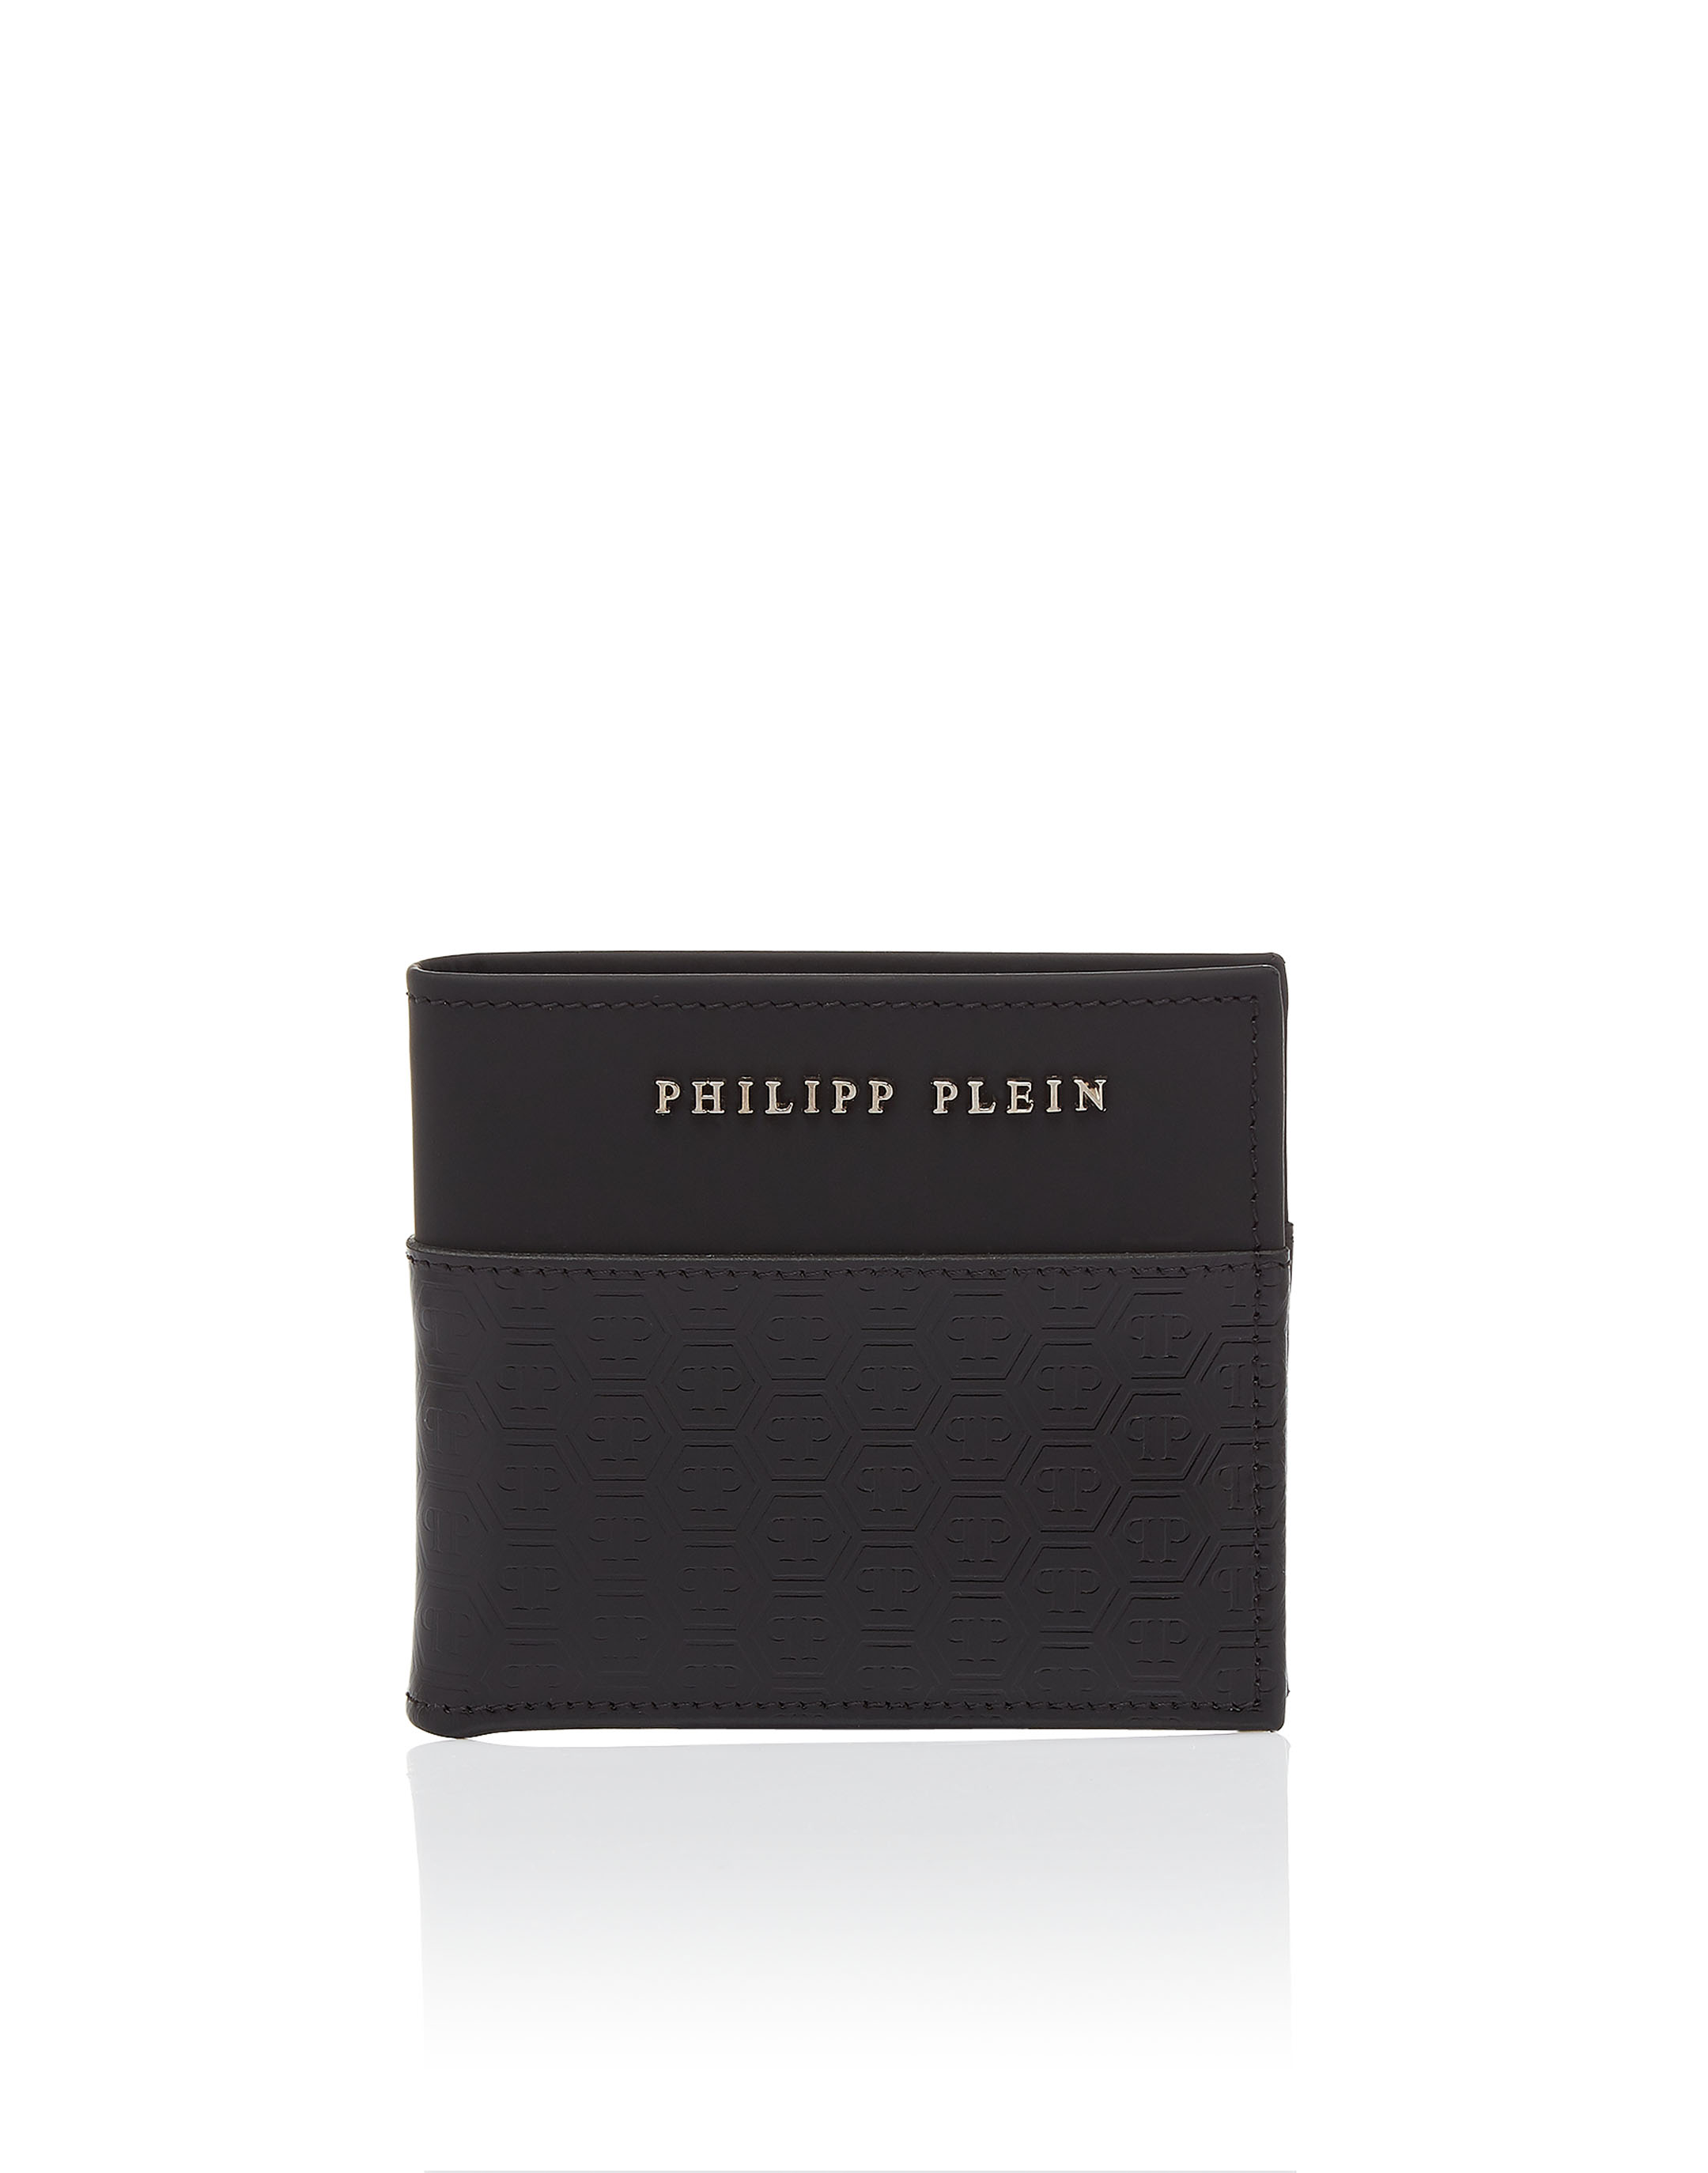 French wallet "Can" | Philipp Plein Outlet